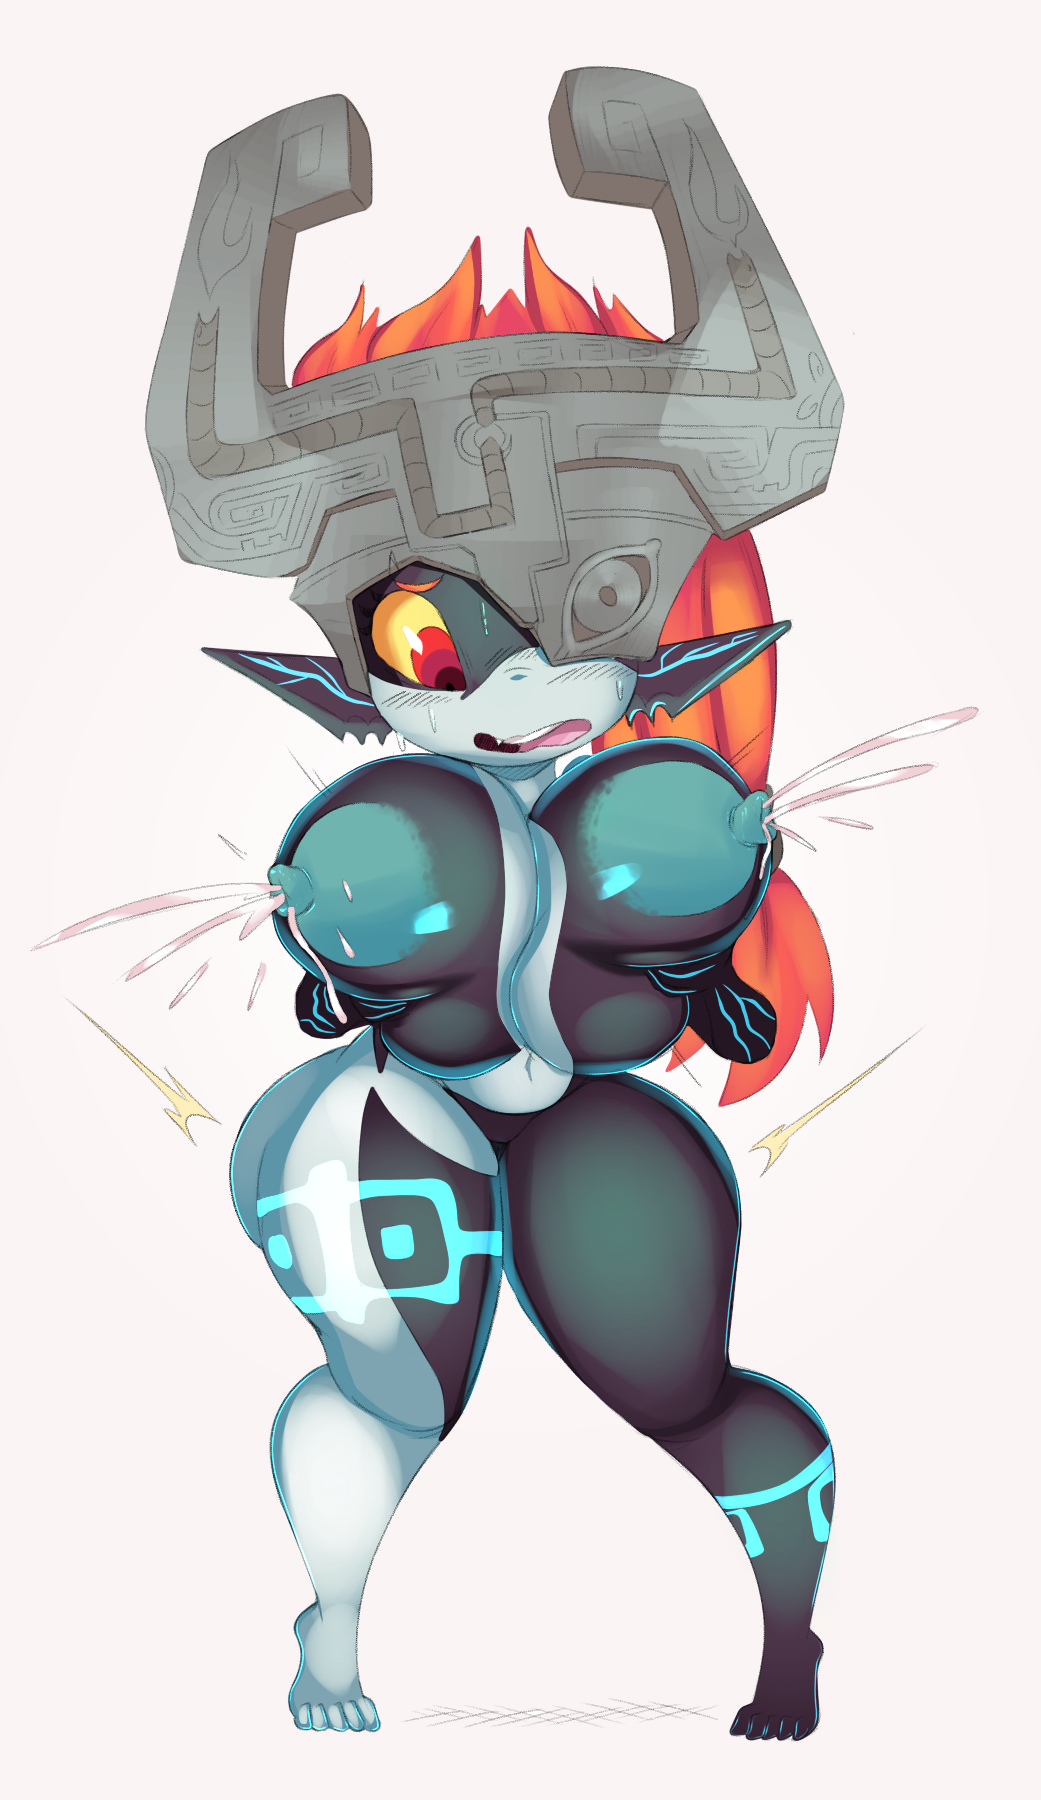 Midna breast expansion